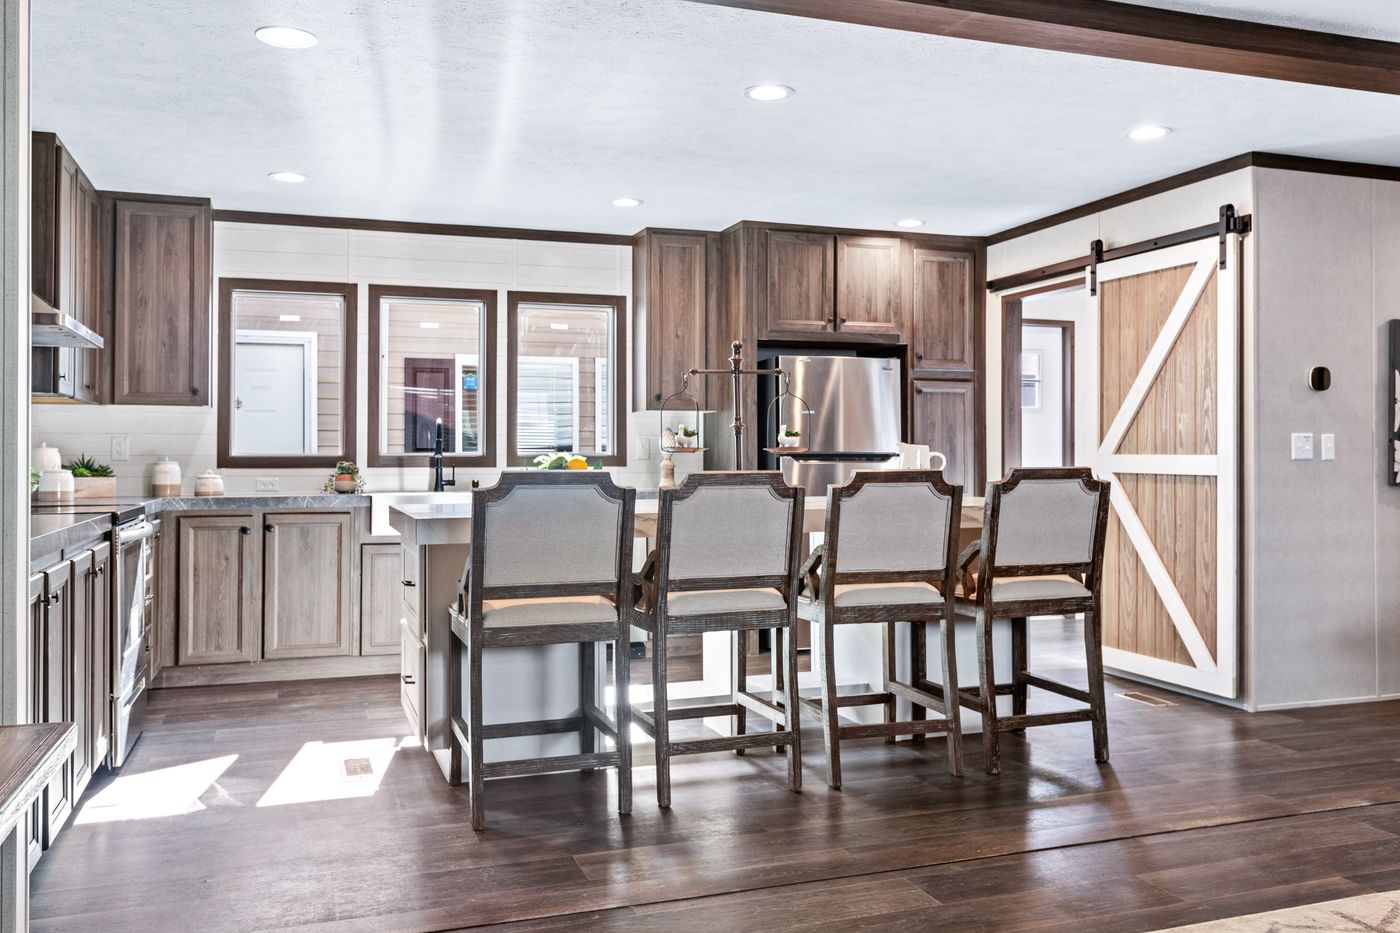 The THE RENEGADE Kitchen. This Manufactured Mobile Home features 3 bedrooms and 2 baths.